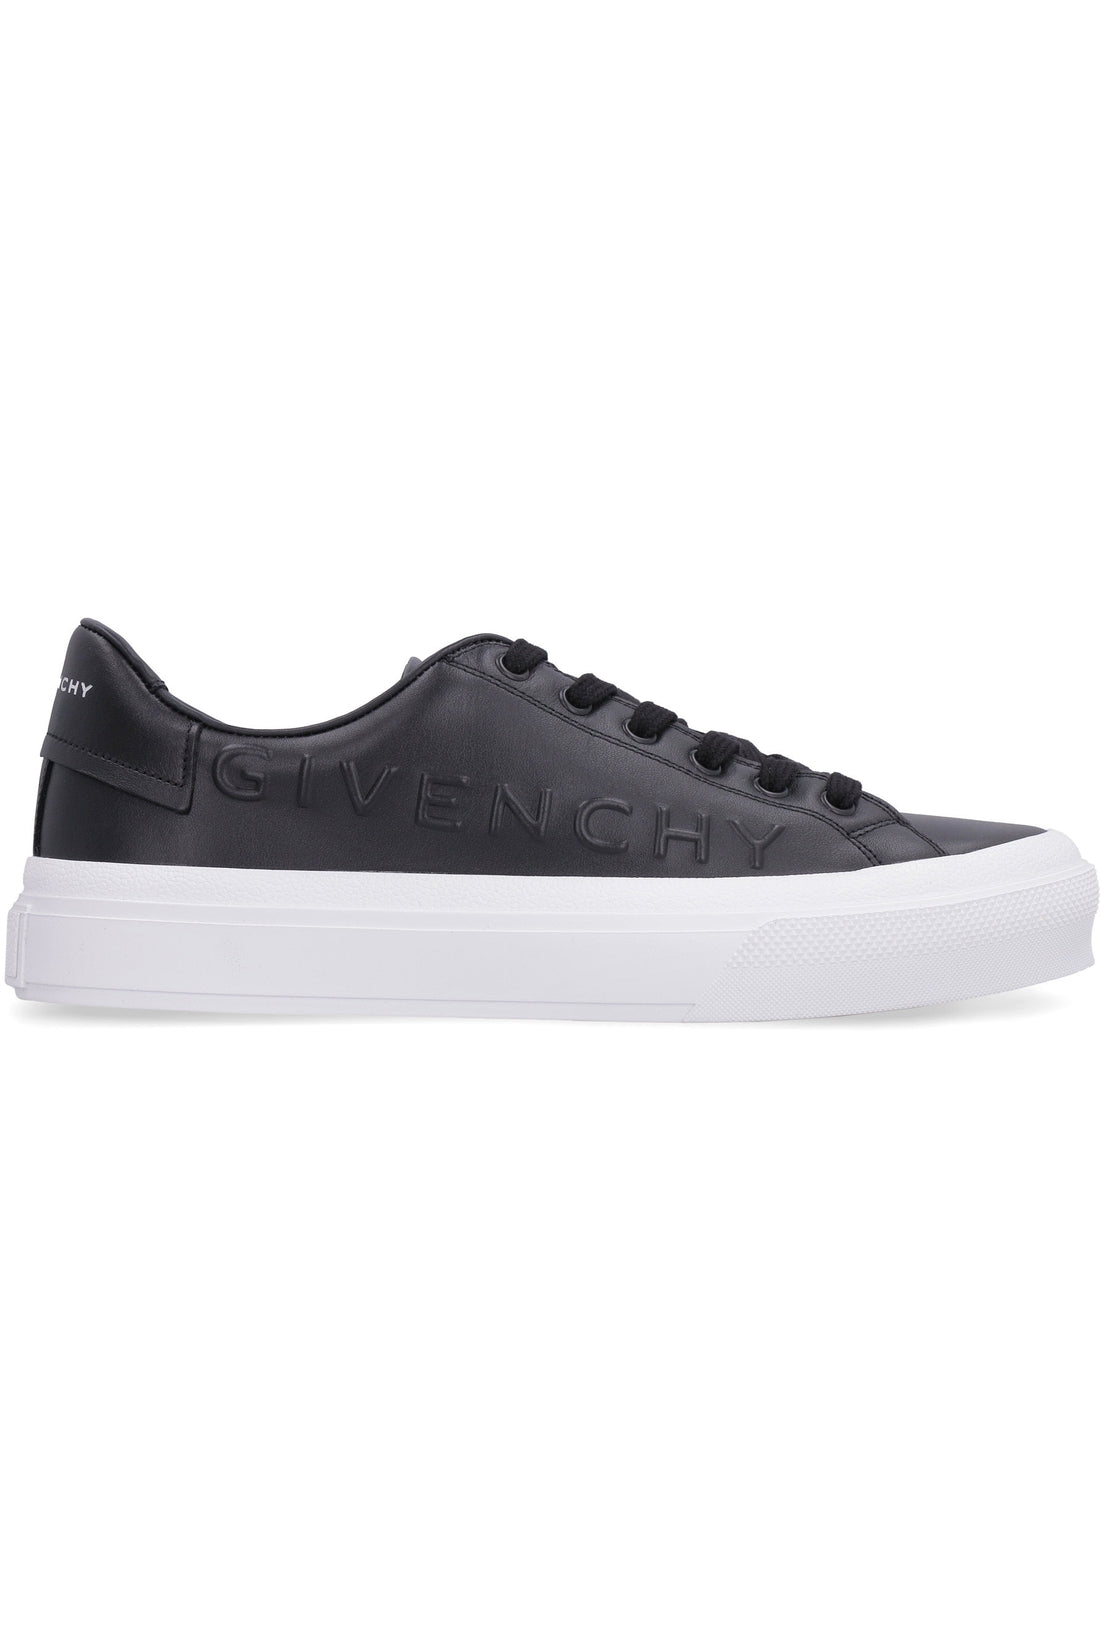 Givenchy-OUTLET-SALE-City Sport leather low-top sneakers-ARCHIVIST